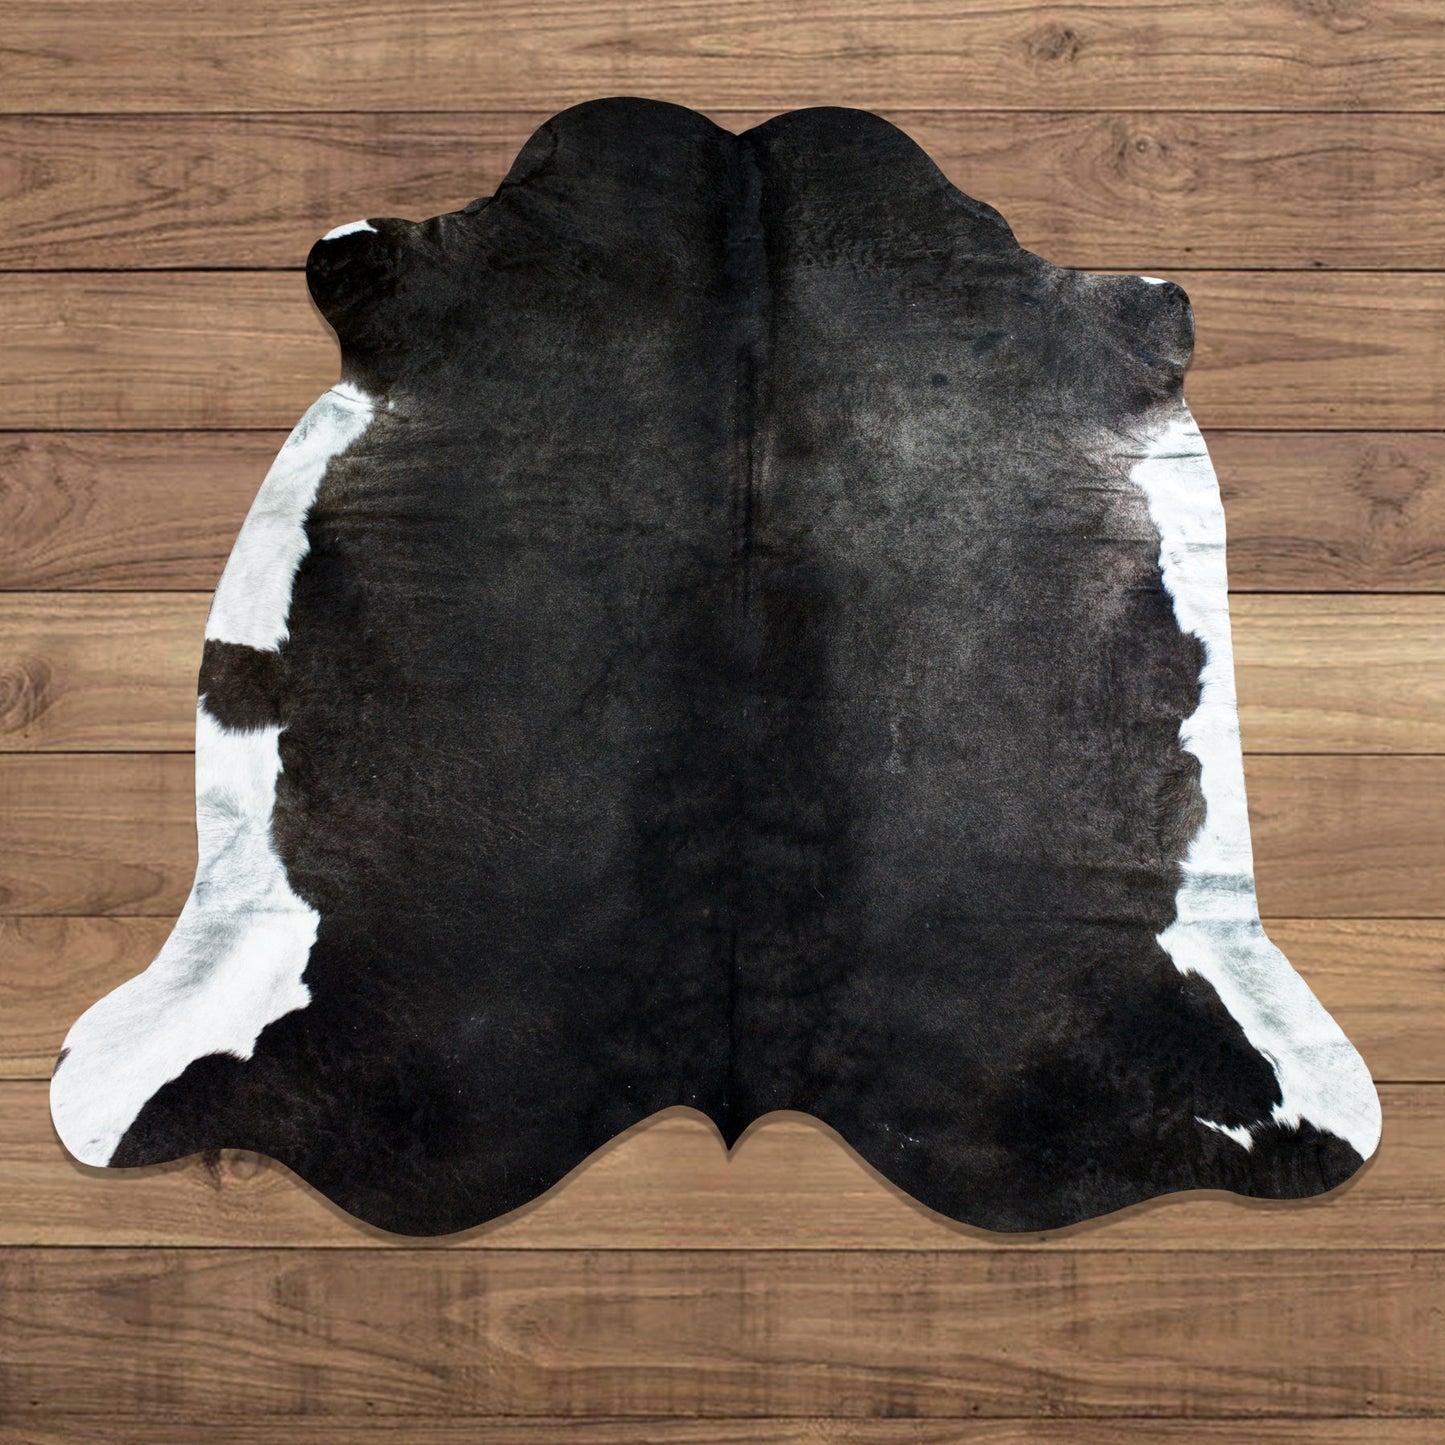 Extra Large RODEO exotic cowhide rug 6.9 x 7.7 ft-- -4292 - Rodeo Cowhide Rugs